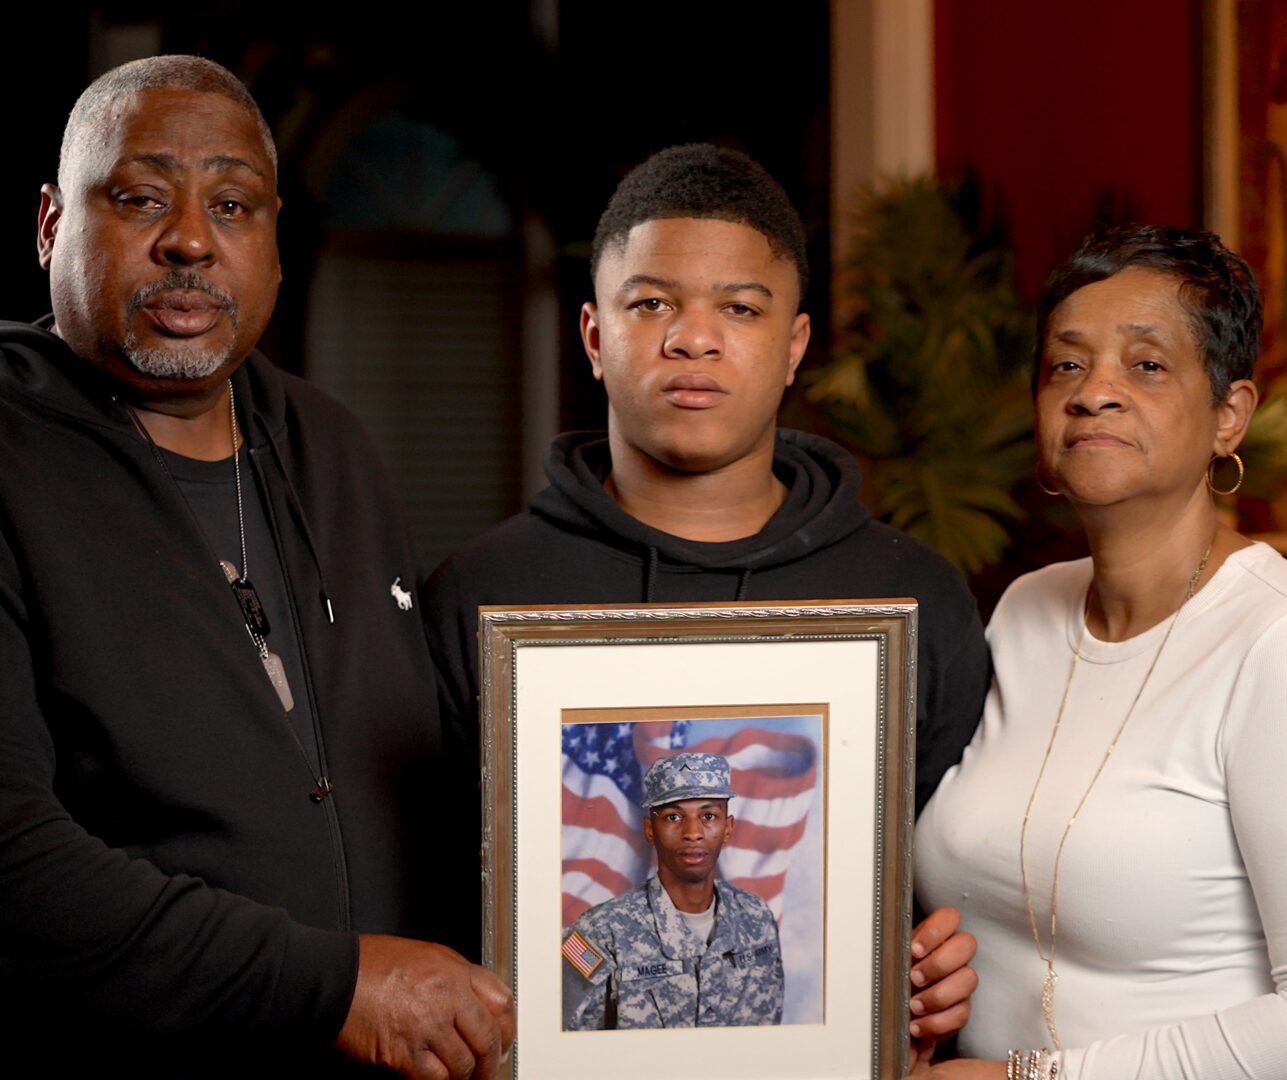 The father, son, and mother of Sgt. Anthony Magee; Tony Davis, Kameron Johnson, and Patricia Magee Davis.